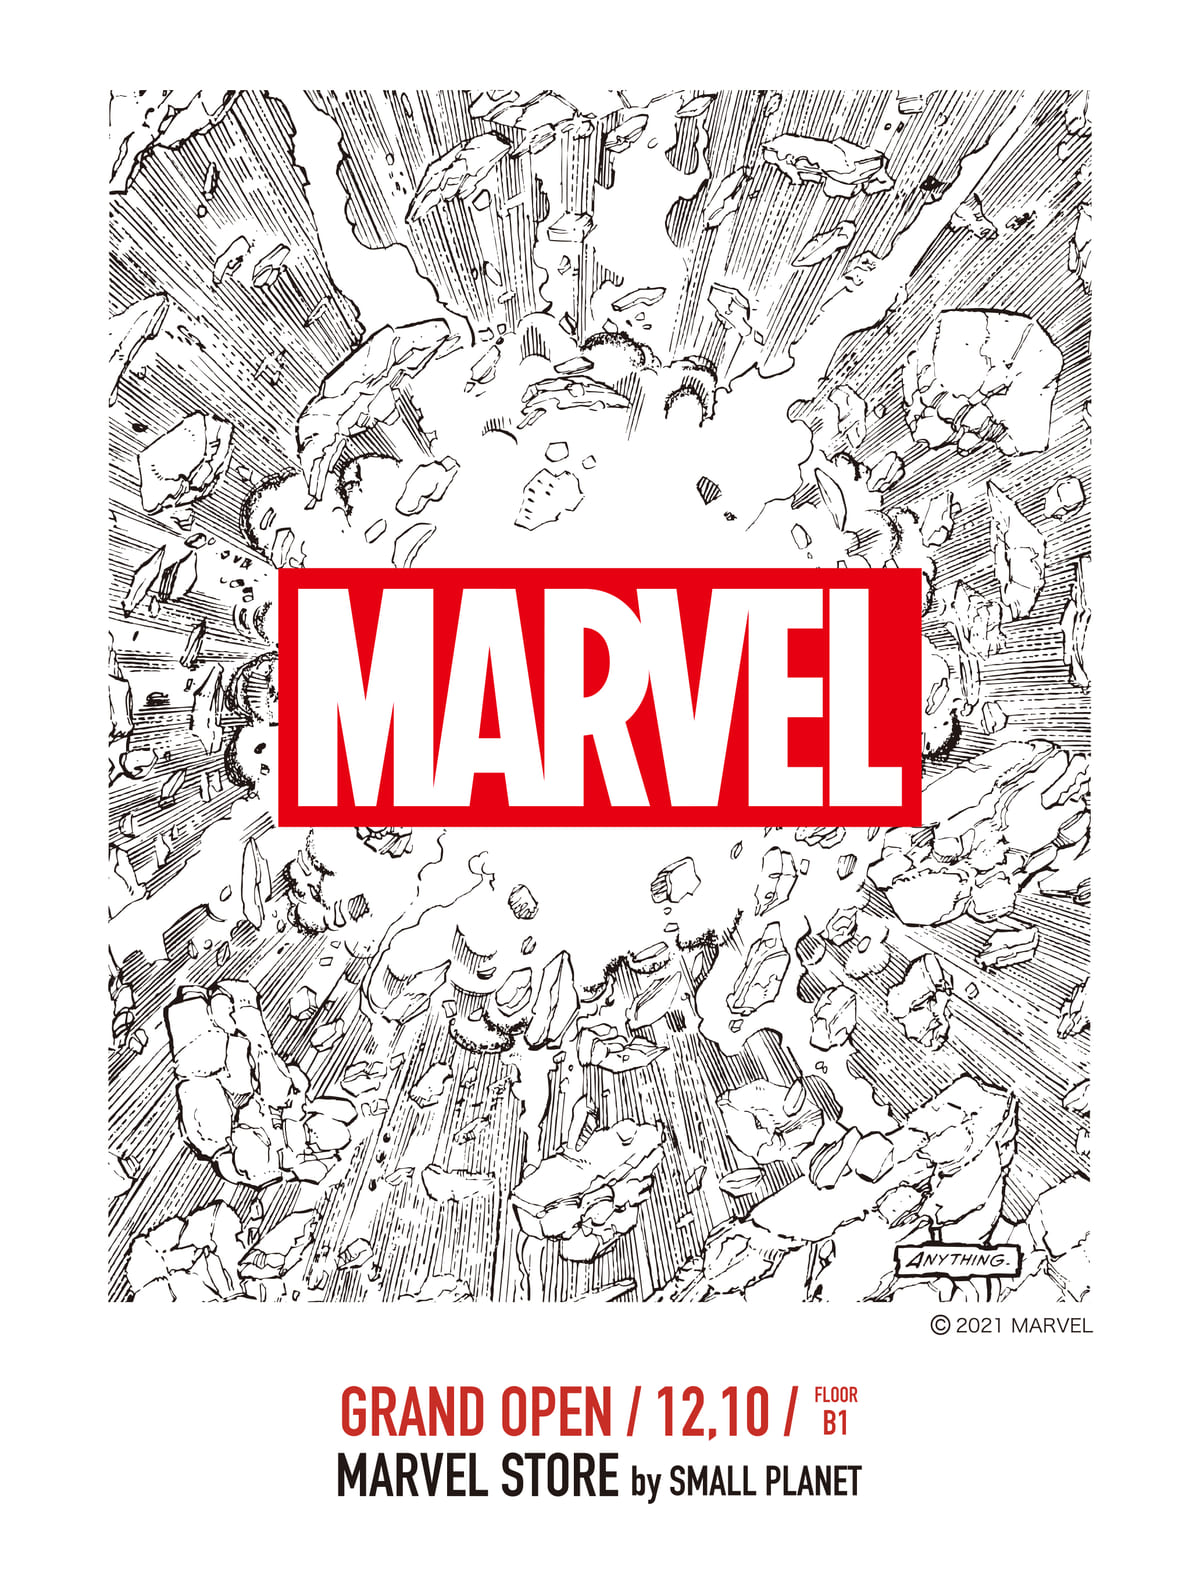 Marvel Store By Small Planet ロゴ Dtimes